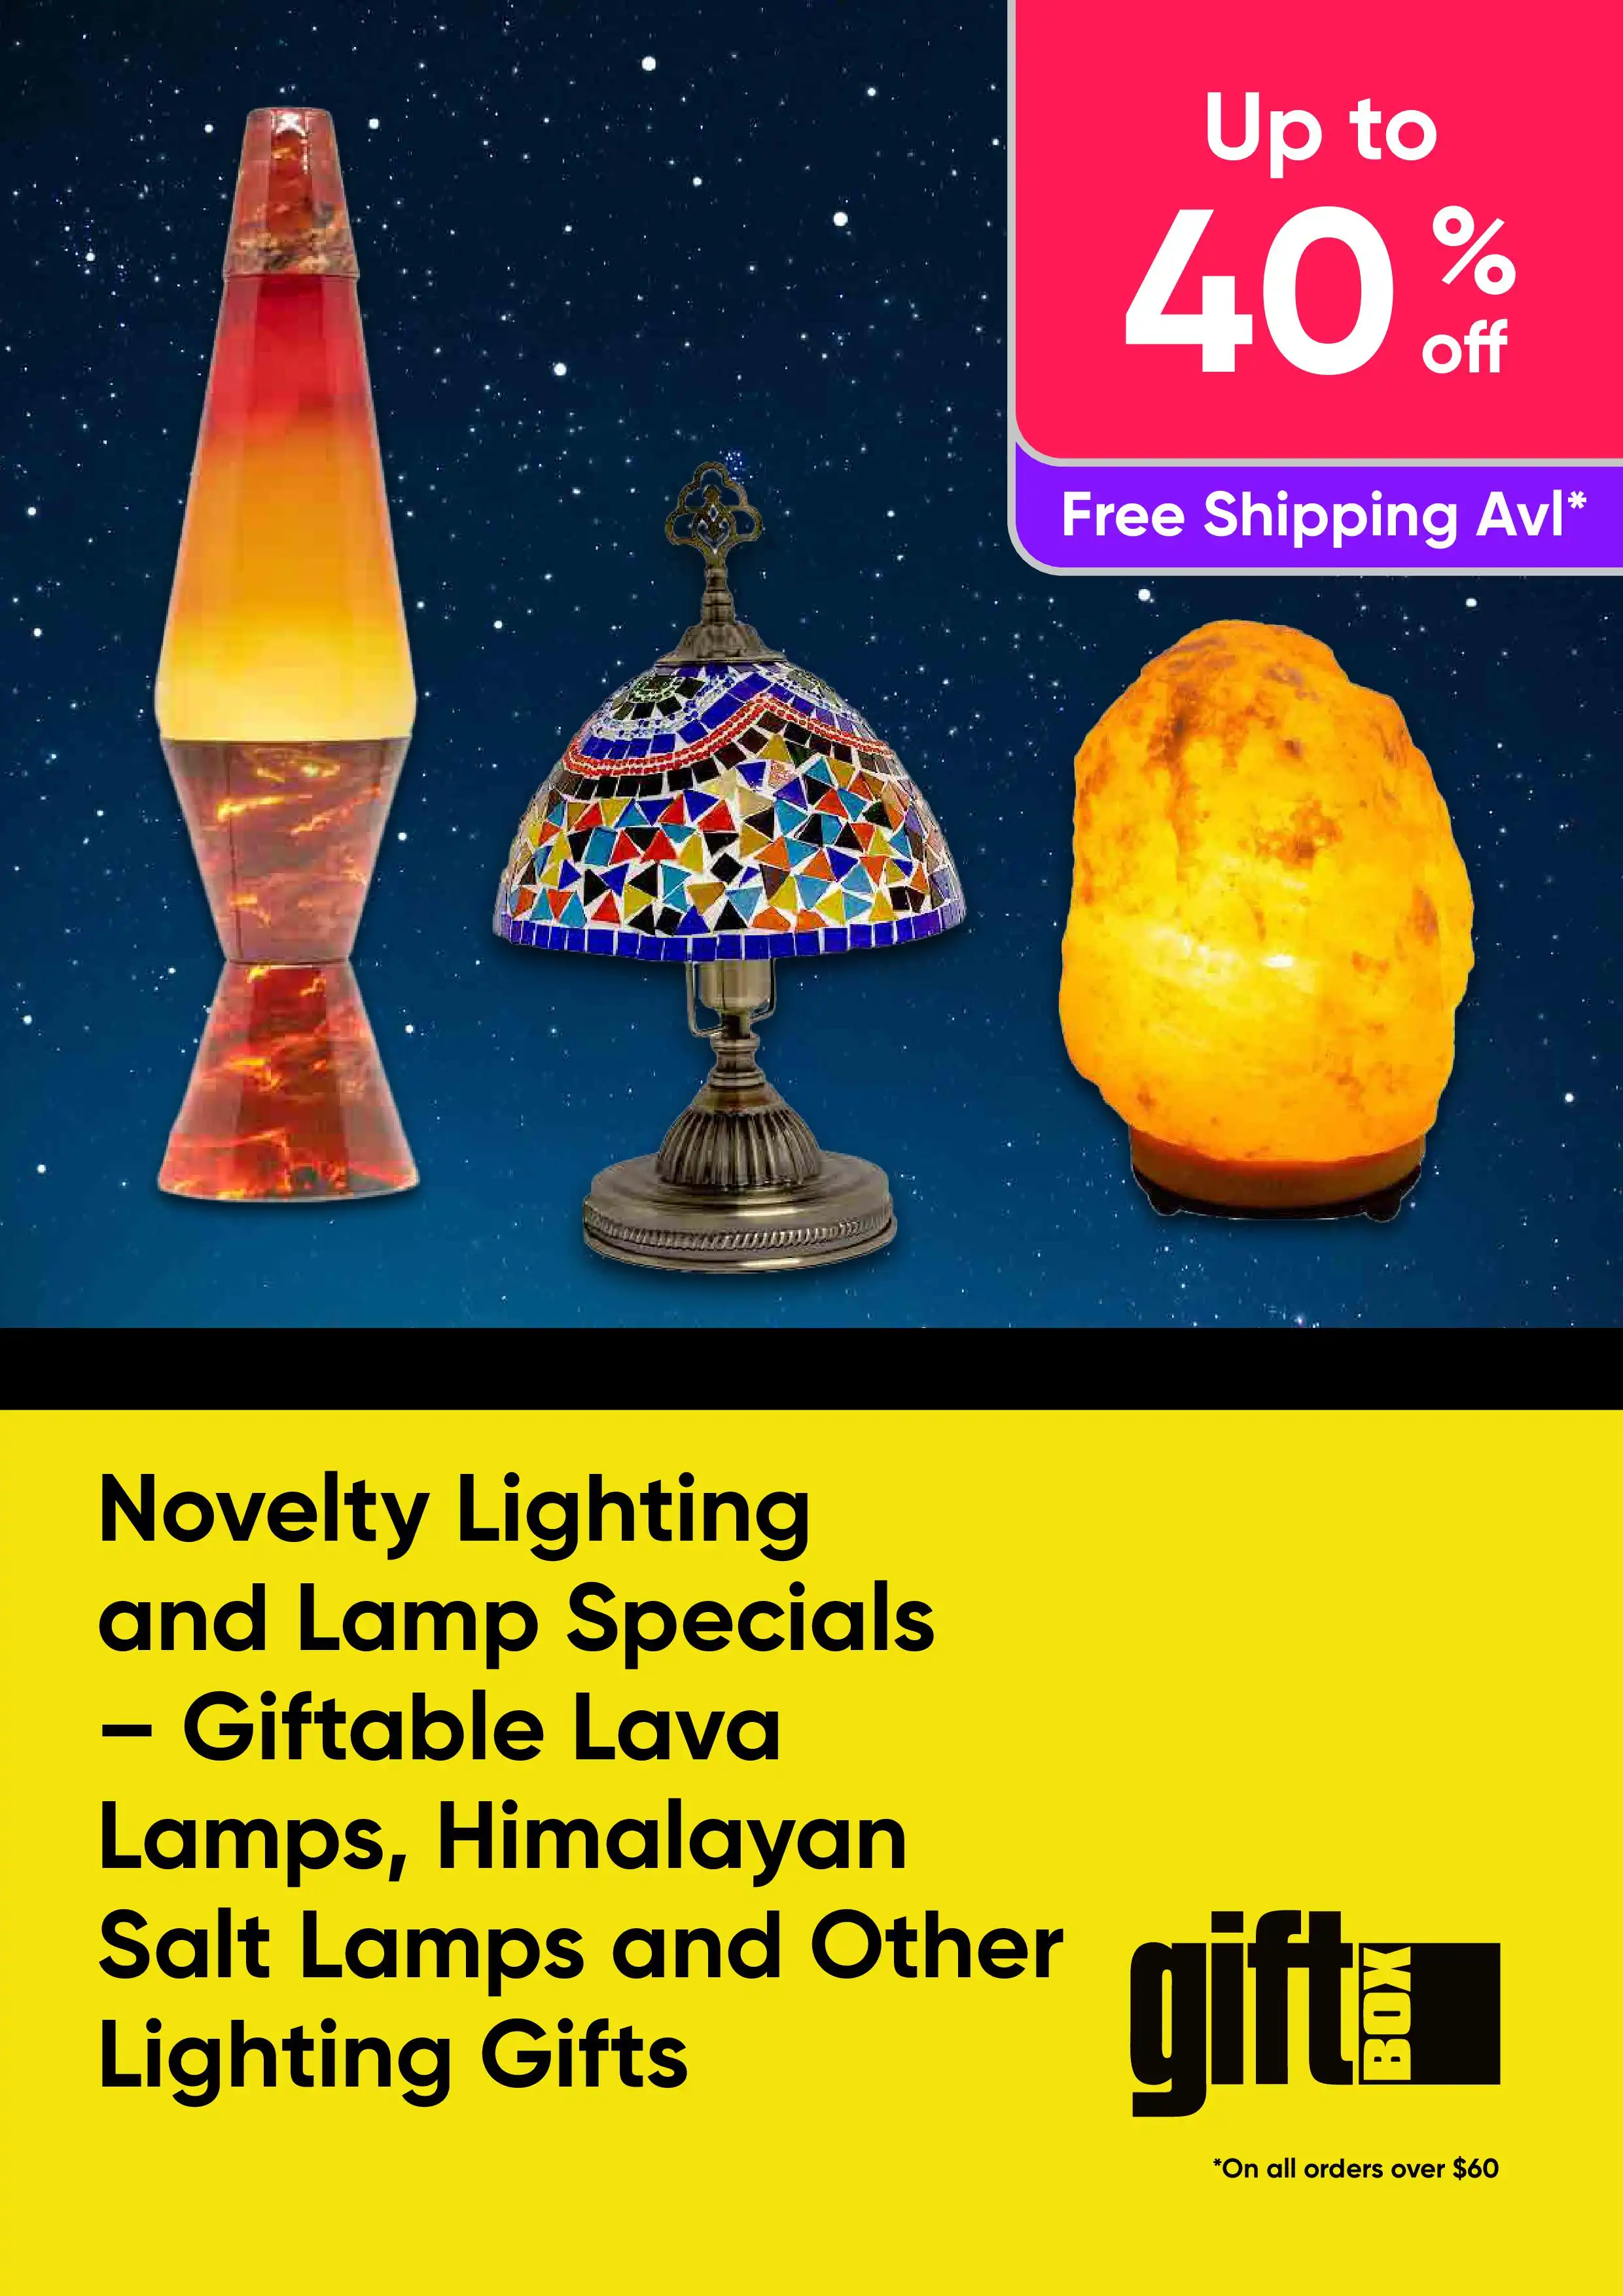 Novelty Lighting and Lamp Specials - Giftable Lava Lamps, Himalayan Salt Lamps and Other Lighting Gifts - Up to 40% off